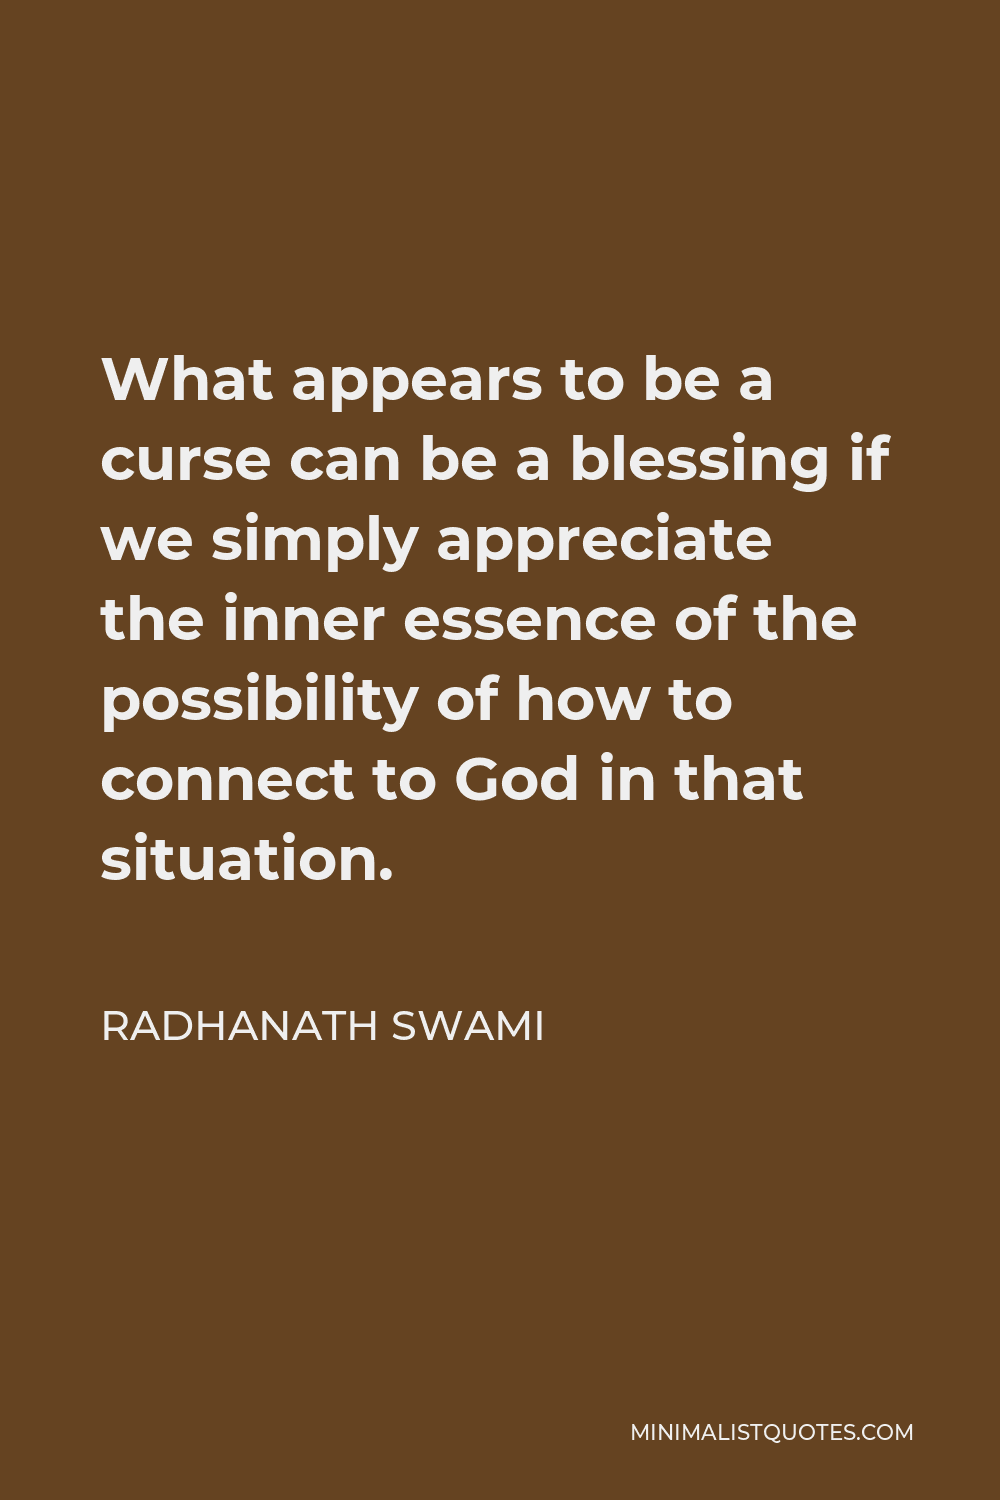 Radhanath Swami Quote - What appears to be a curse can be a blessing if we simply appreciate the inner essence of the possibility of how to connect to God in that situation.